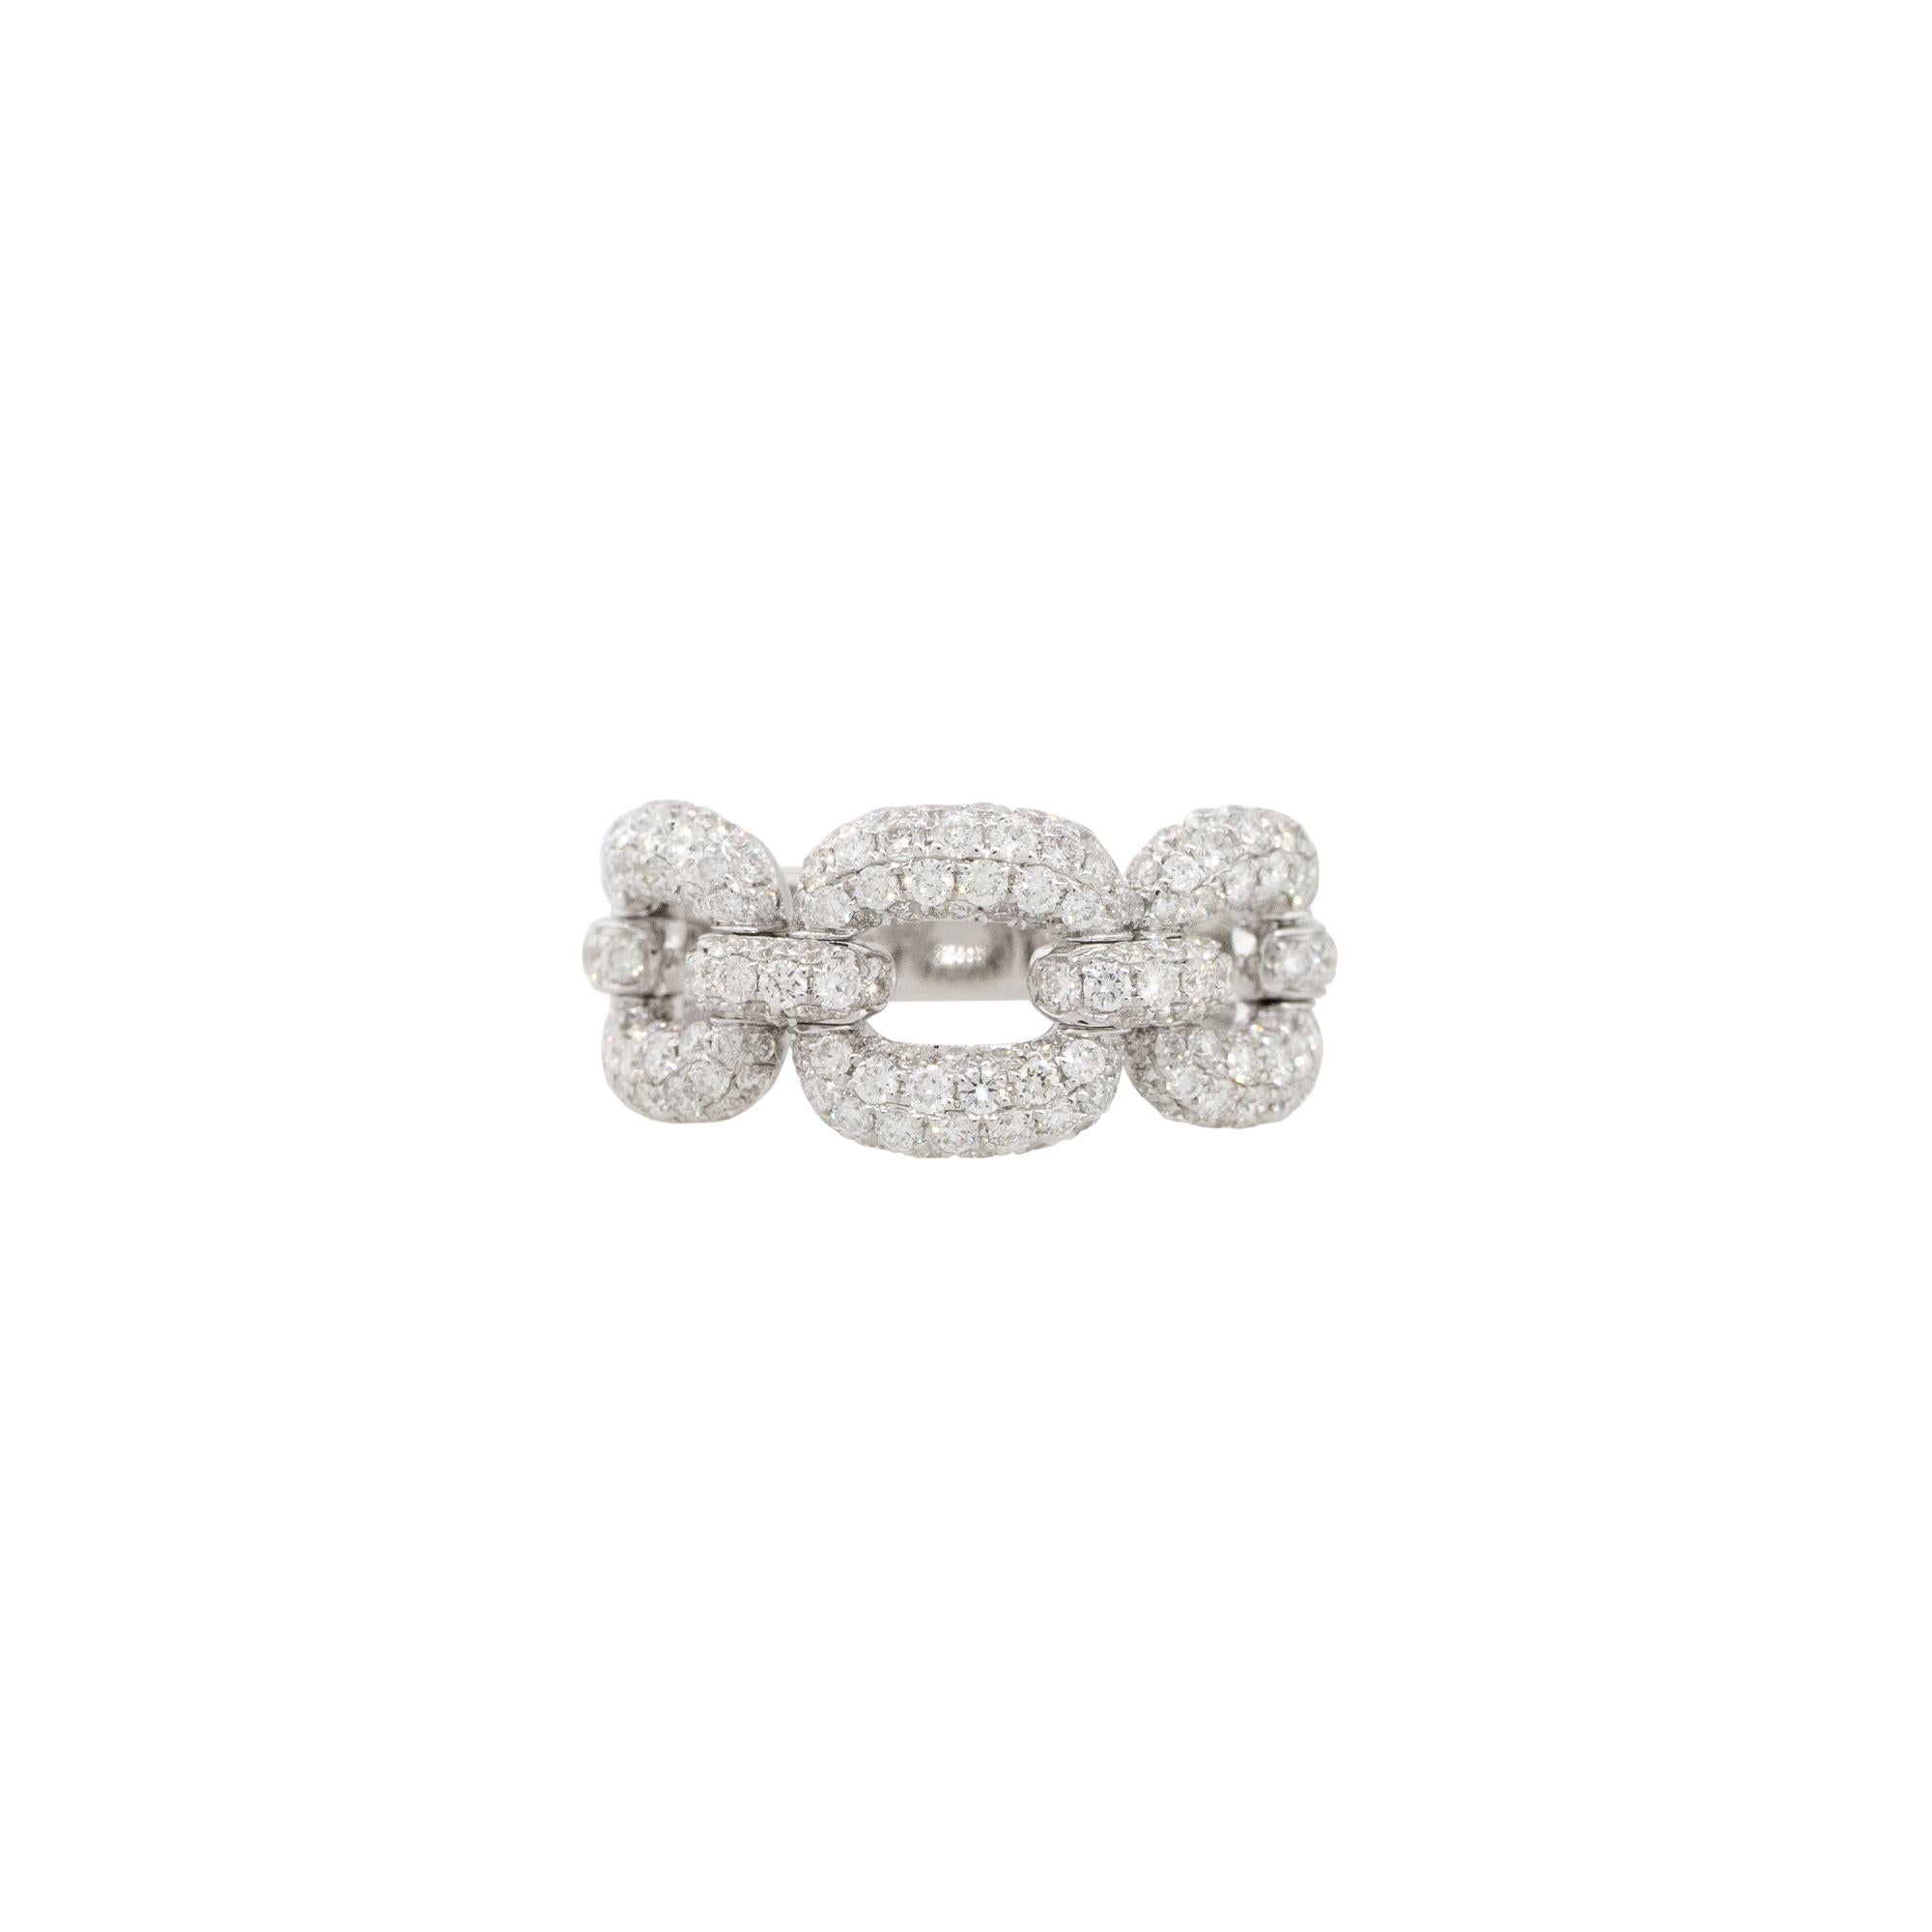 18k White Gold 1.69ctw Pave Diamond Oval Link Collapsible Ring
Style: Women's Diamond Oval Link Ring
Material: 18k White Gold
Main Diamond Details: Approximately 1.69ctw of Pave set, Round Brilliant Diamonds. There are 196 stones total. Diamonds are